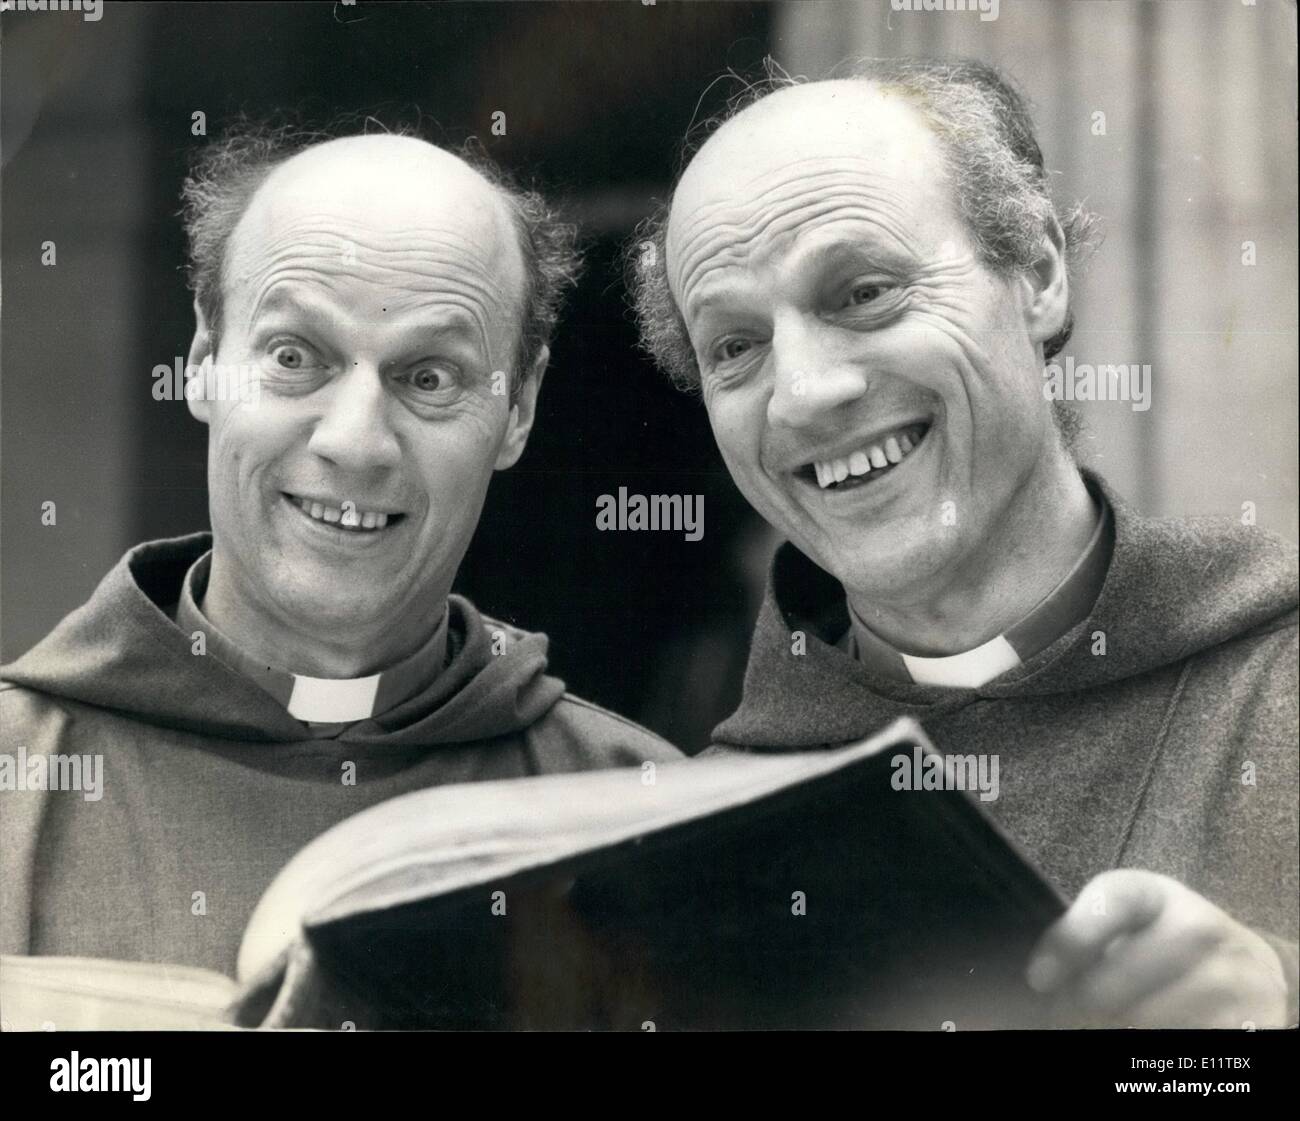 Mar. 03, 1980 - Identical Twins Become Bishops: Twin brothers of 48, identical in looks and voice, are soon to be among the bishops in the Church of England. The Revd Michael Thomas Ball has been appointed Bishop of Jarrow - his brother the Rt Revd Peter Ball, CGA, is the Bishop of Lewes and is an inch taller and half an hour older than the new Bishop. The brothers, who were at school and university together, ckaim that a telepathic feeling drew them to found a religious community together in Stroud in 1960 Stock Photo